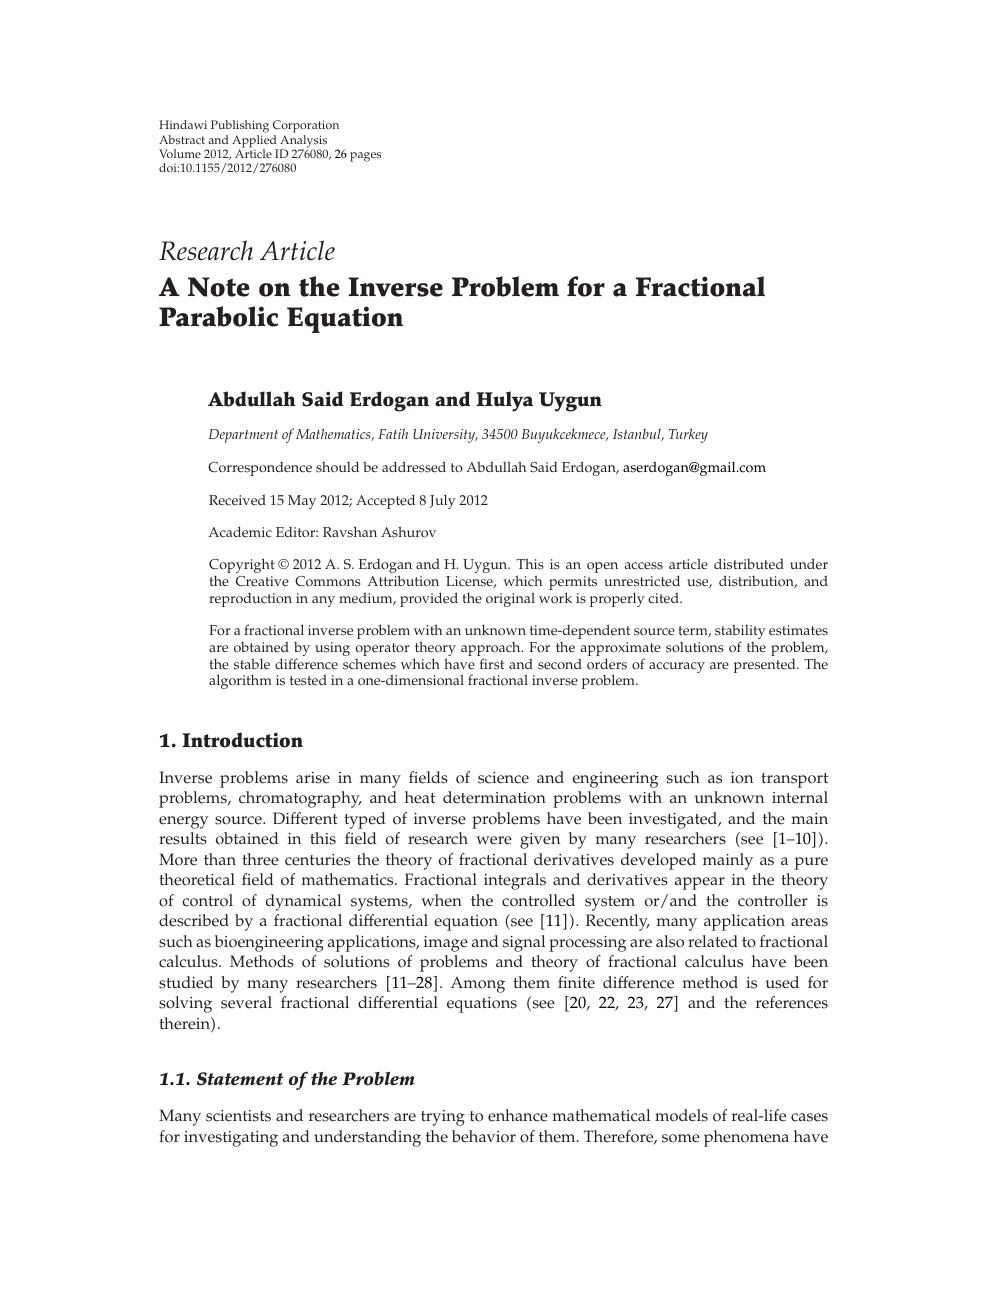 A Note On The Inverse Problem For A Fractional Parabolic Equation Topic Of Research Paper In Mathematics Download Scholarly Article Pdf And Read For Free On Cyberleninka Open Science Hub